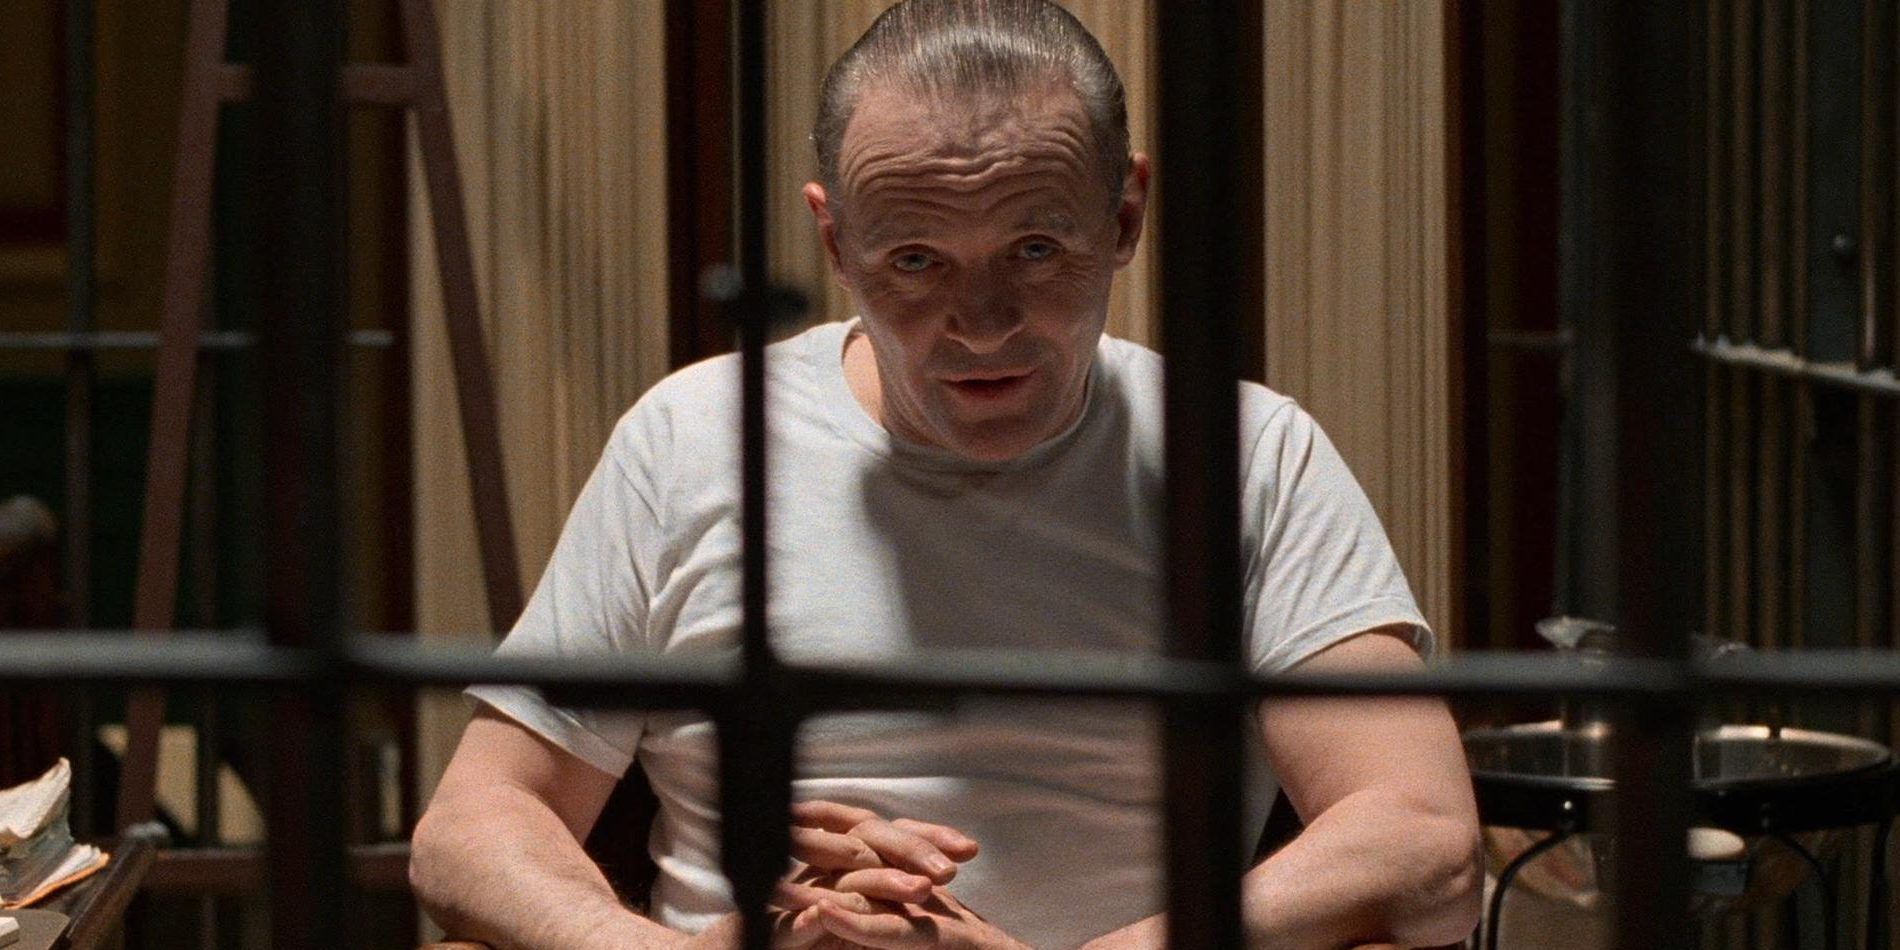 Anthony Hopkins in a jail cell in The Silence of the Lambs.